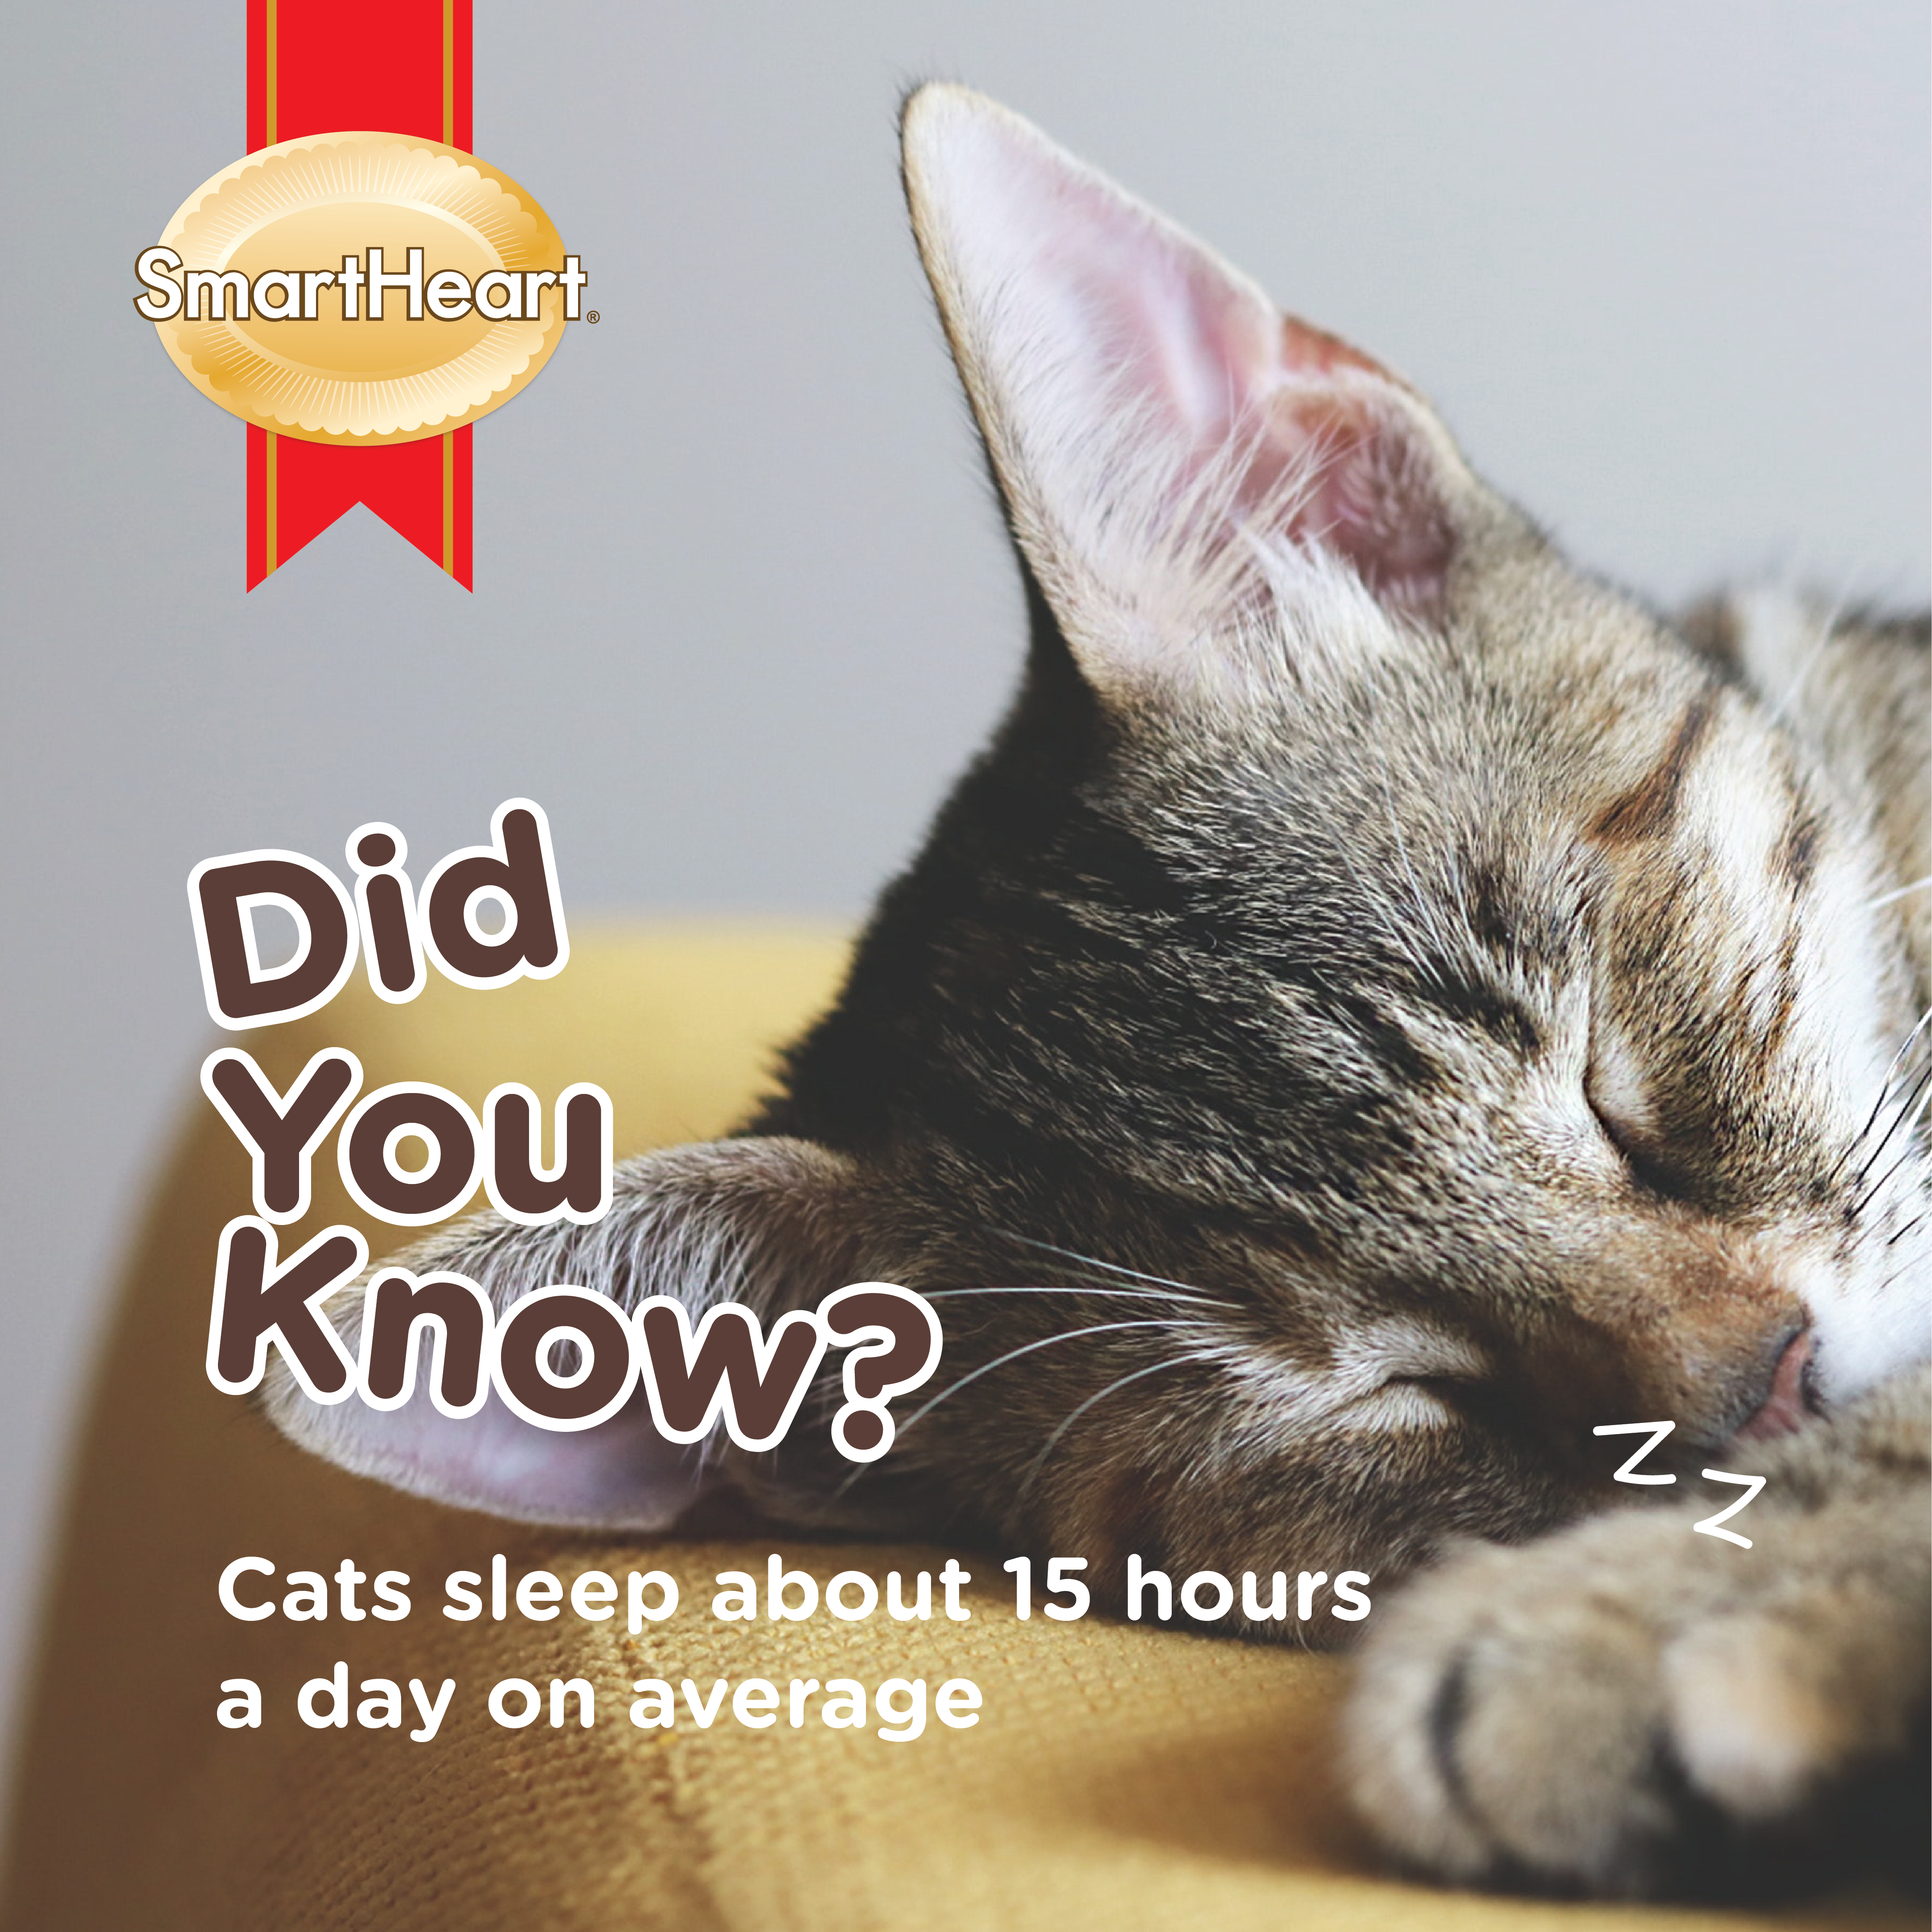 Cats sleep about 15 hours a day on average